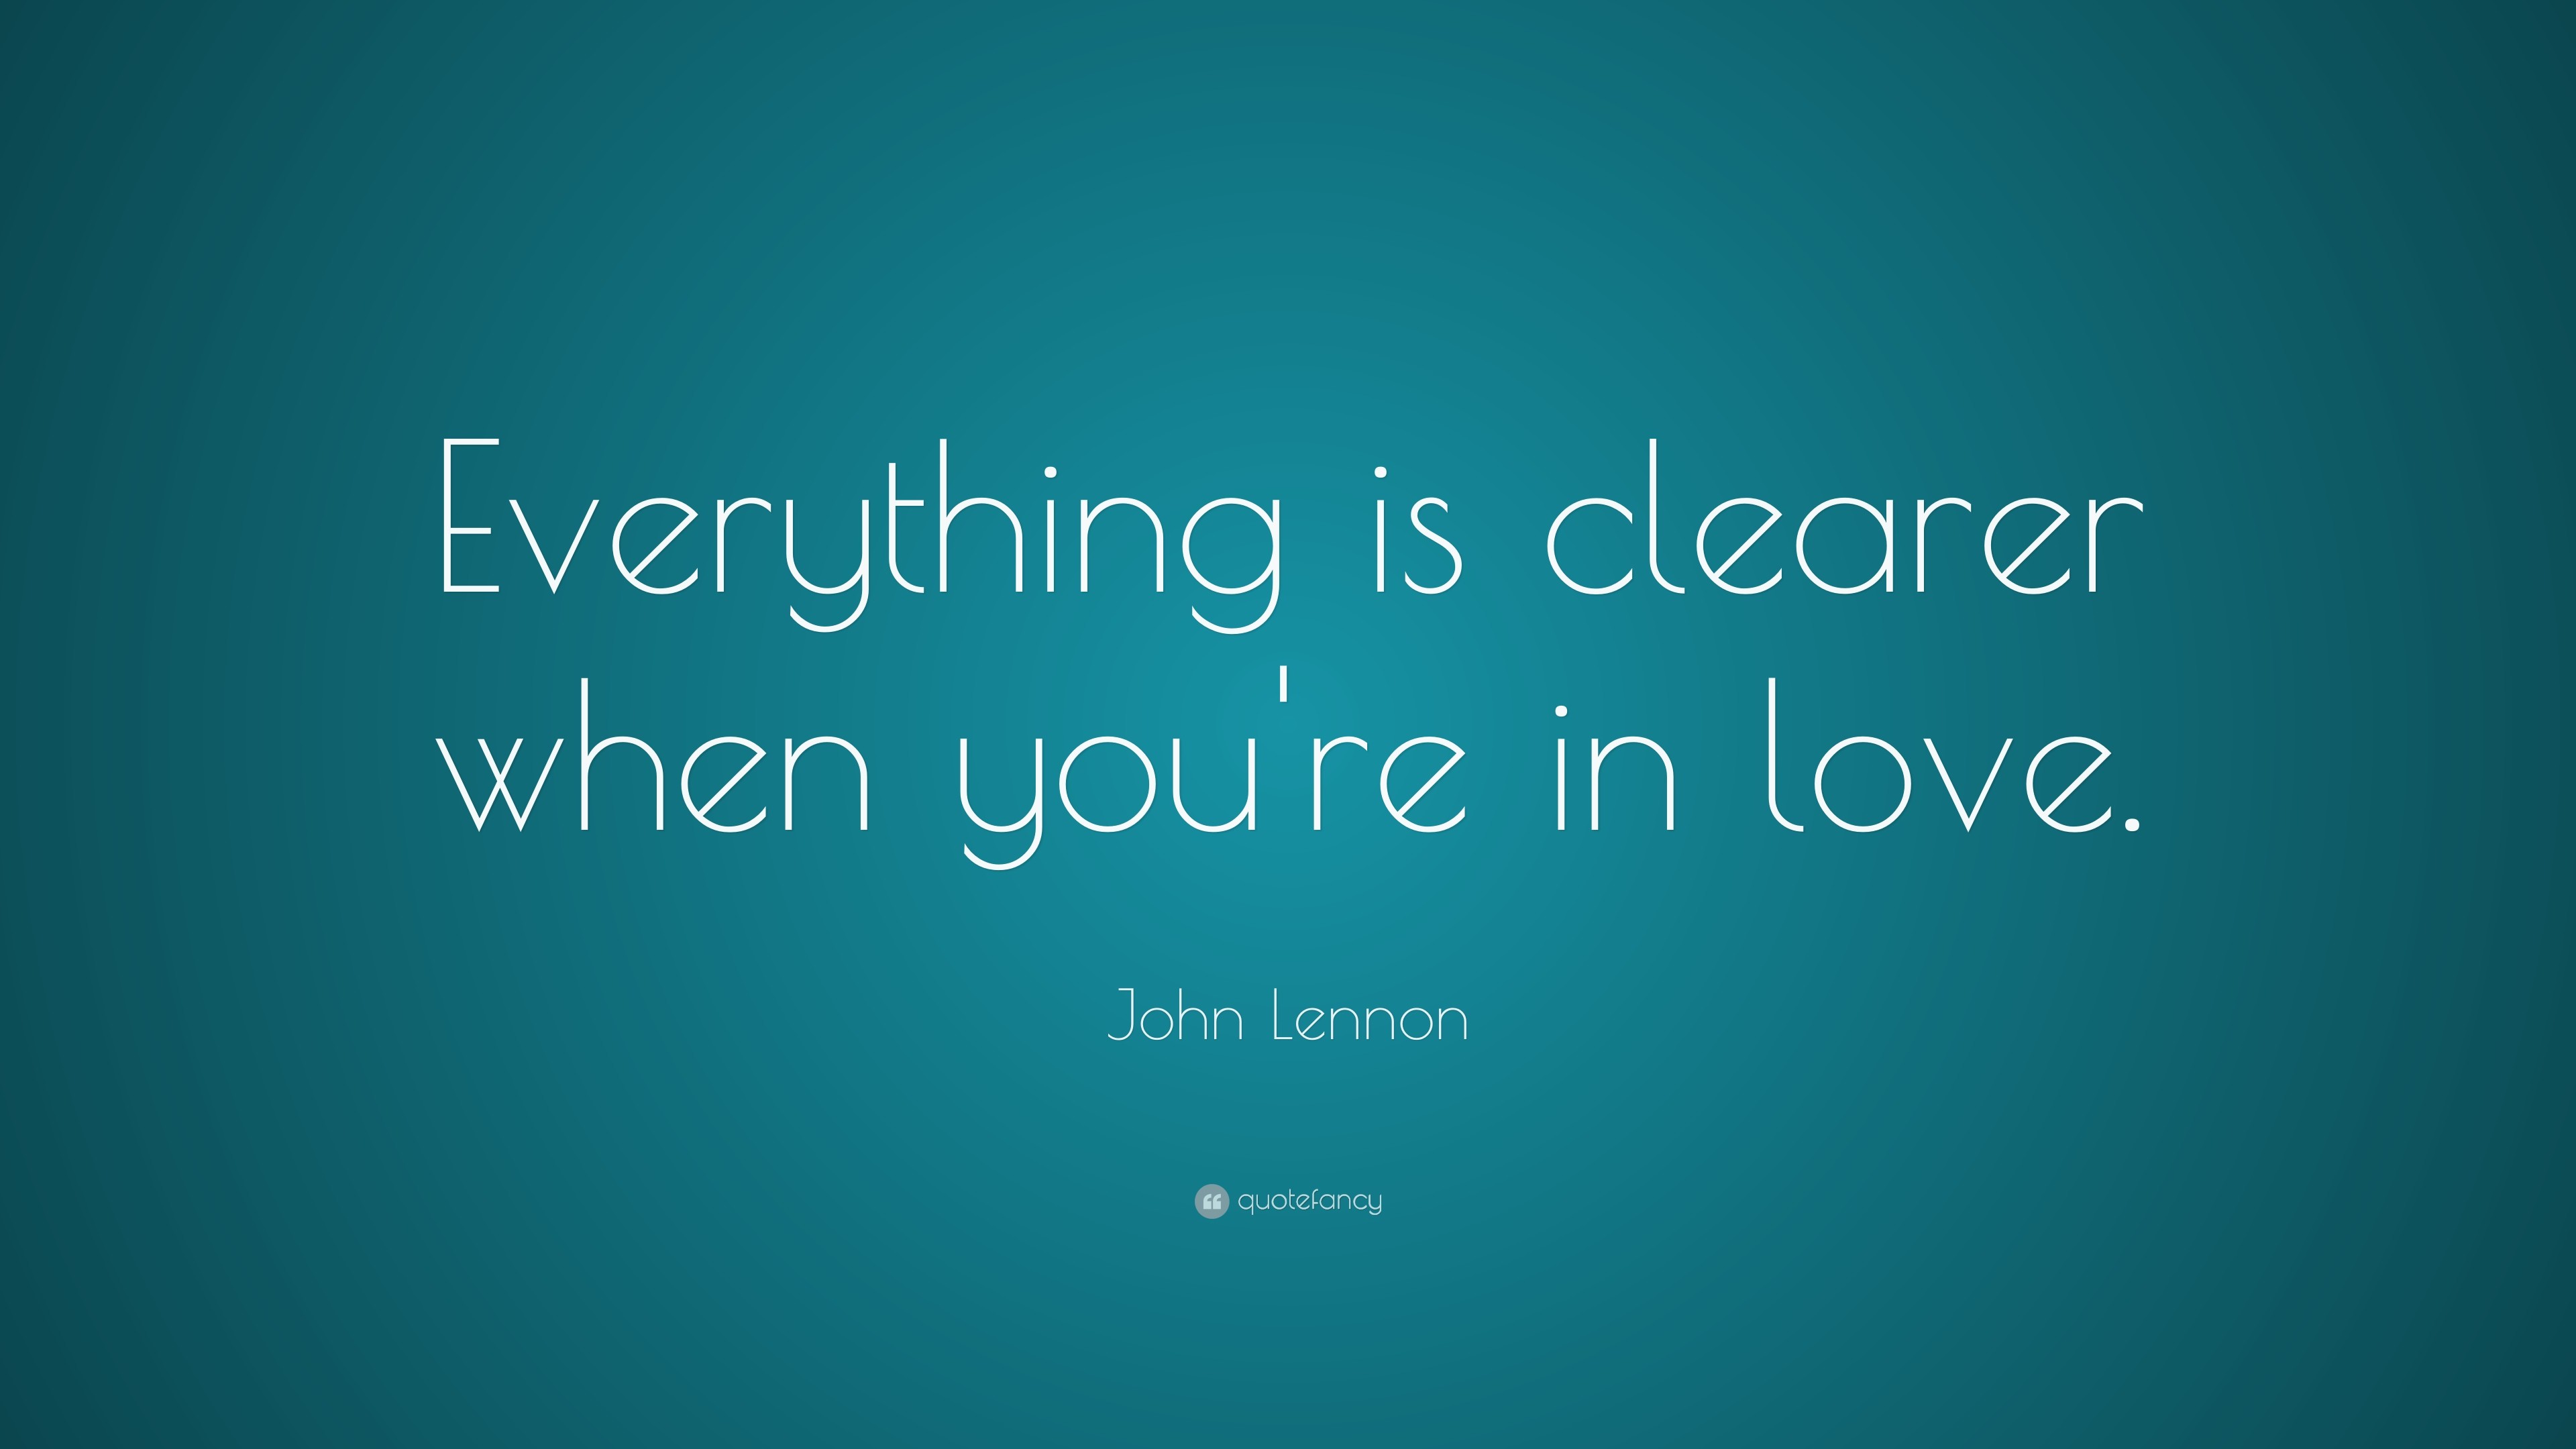 John Lennon Quotes 15 wallpapers – Quotefancy